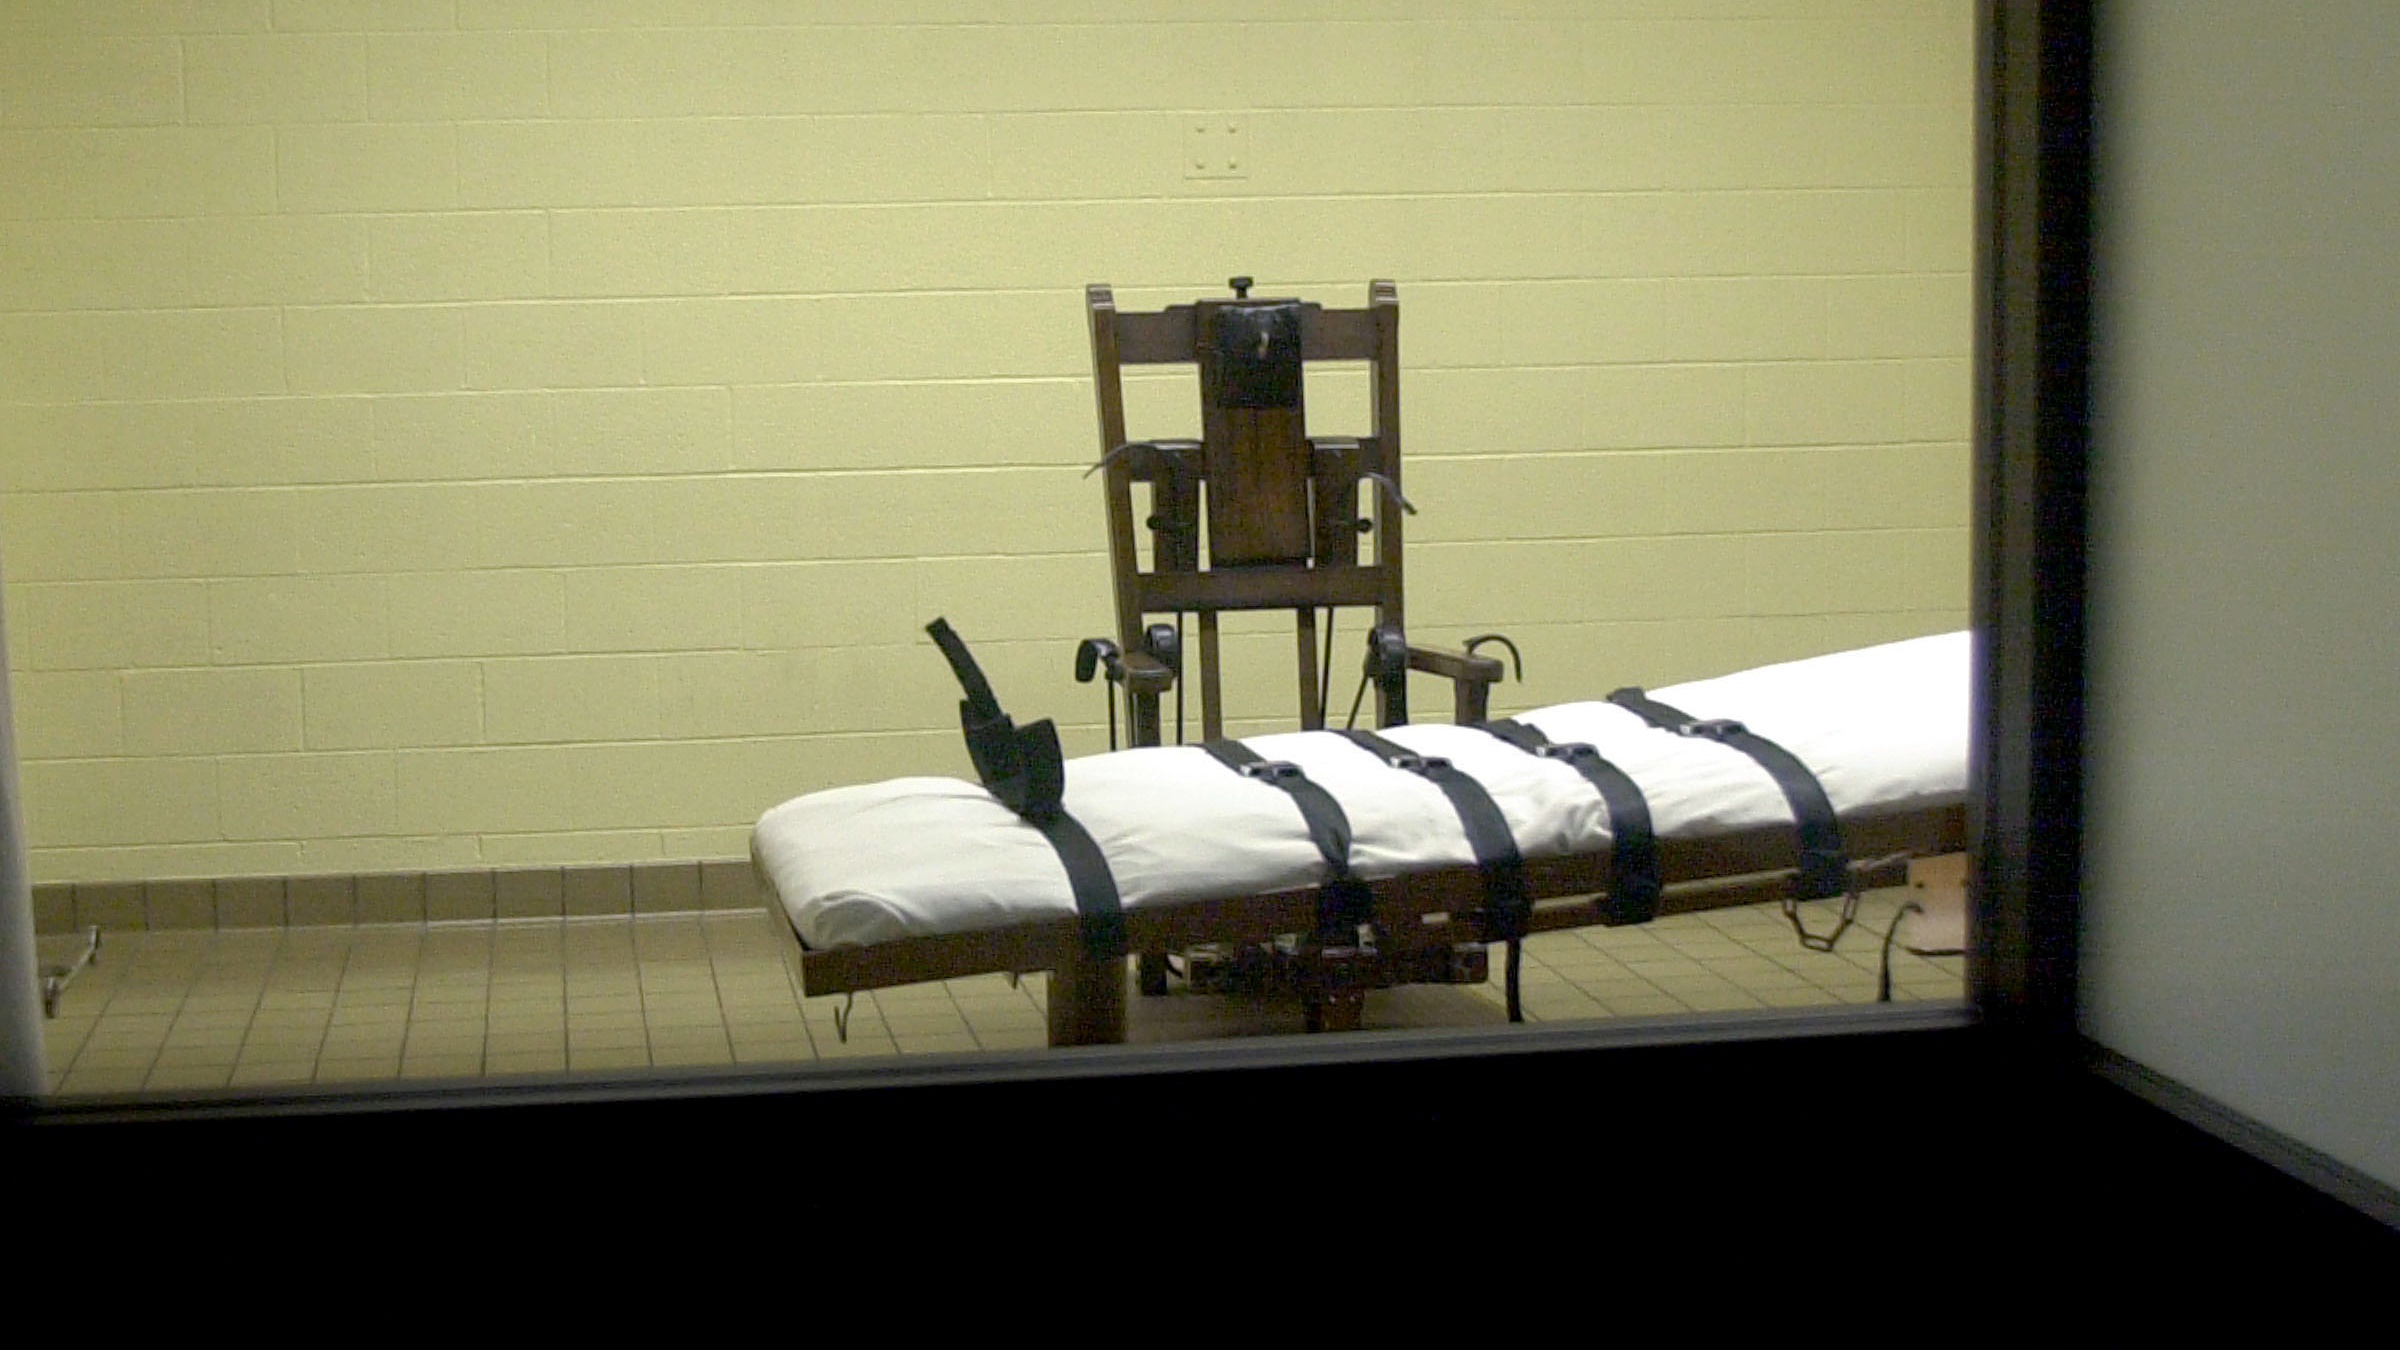 The death chamber at Southern Ohio Correctional Facility